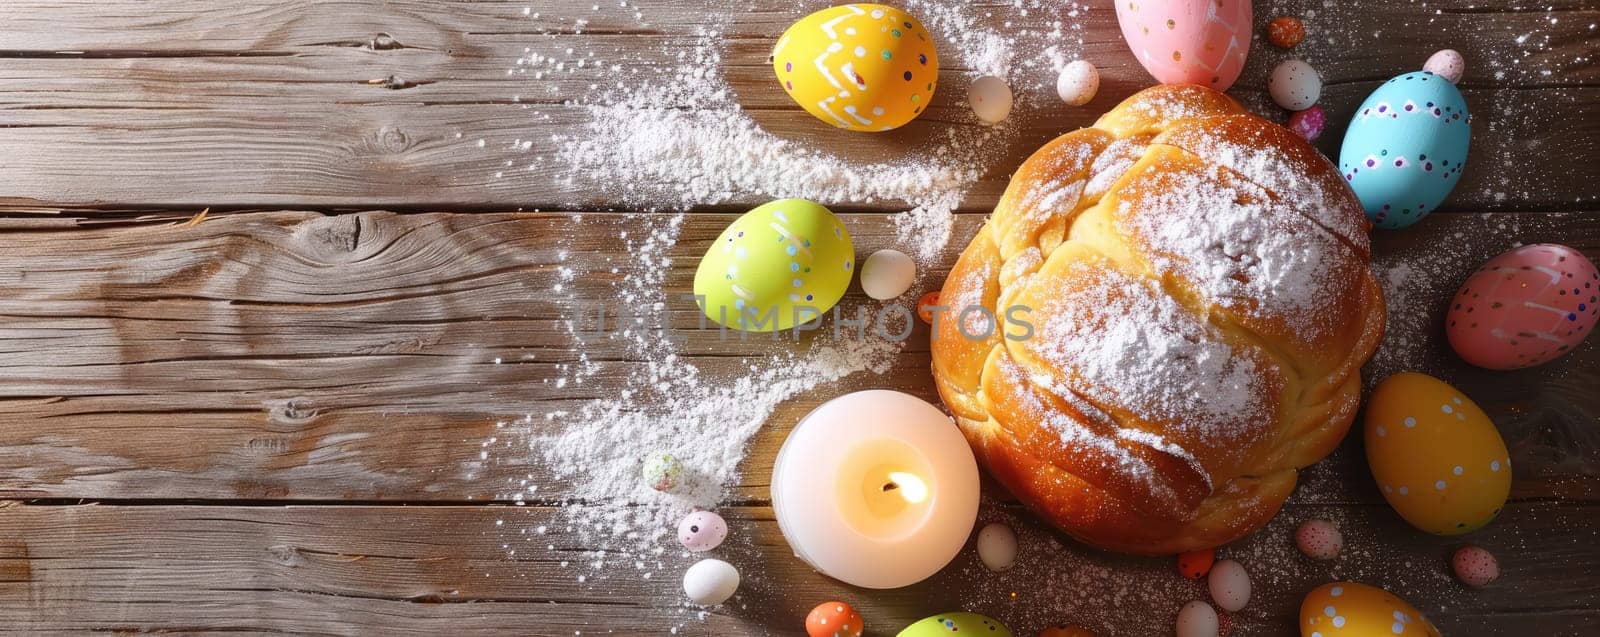 Festive table with traditional Easter cake and colorful Easter eggs